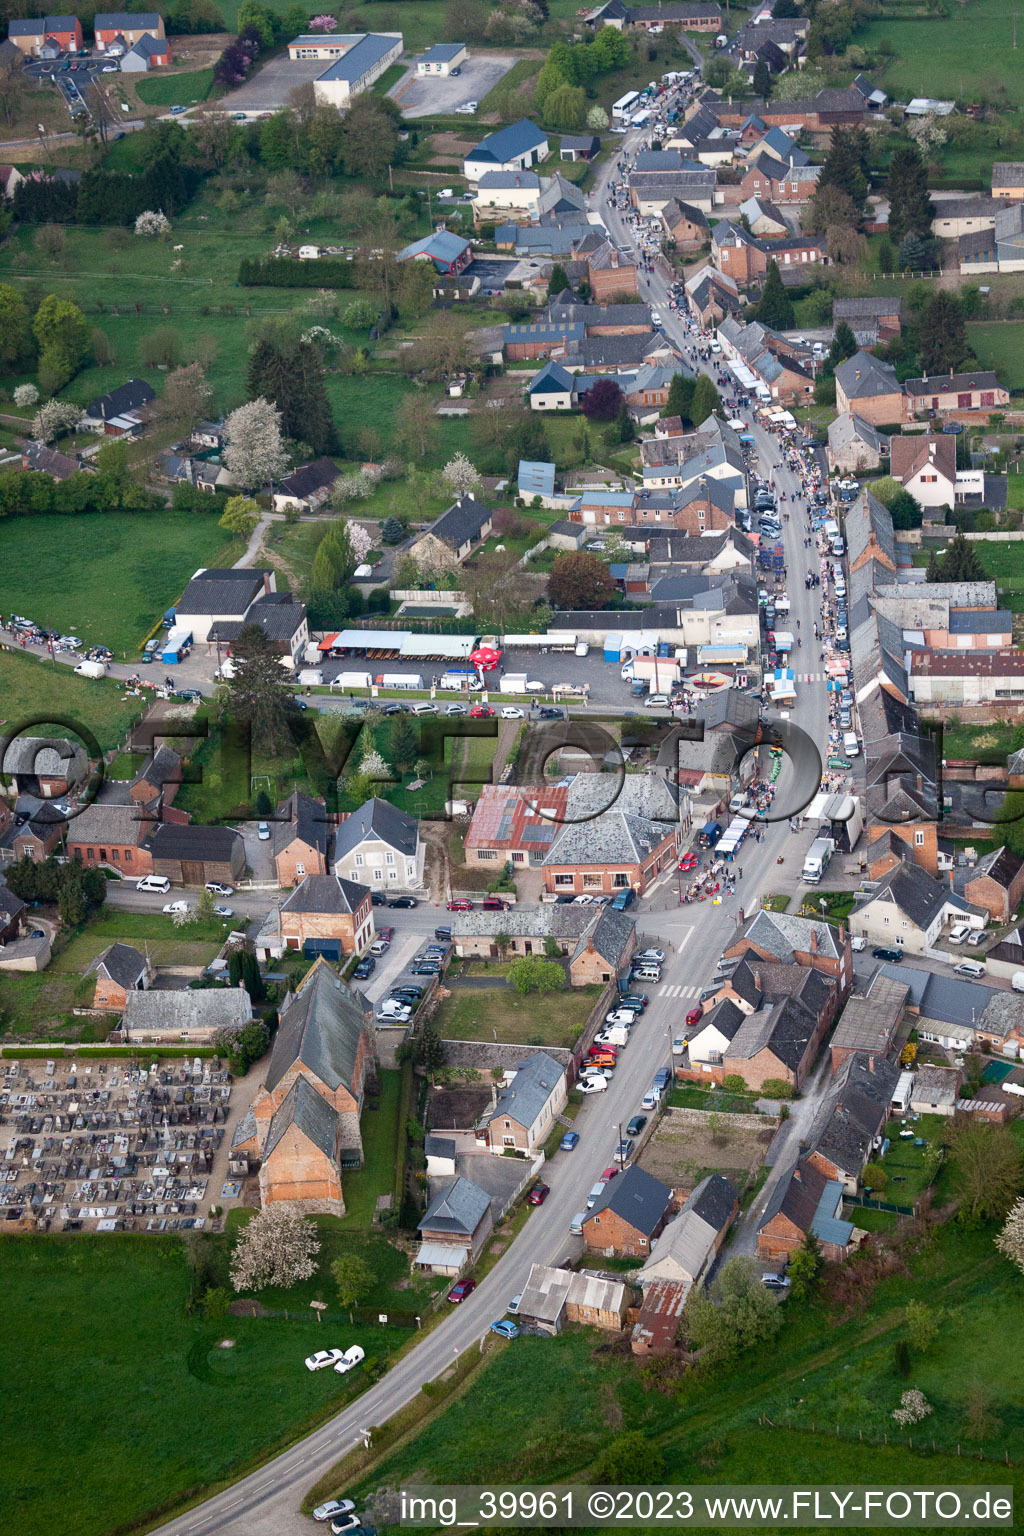 Aerial photograpy of Marly-Gomont in the state Aisne, France